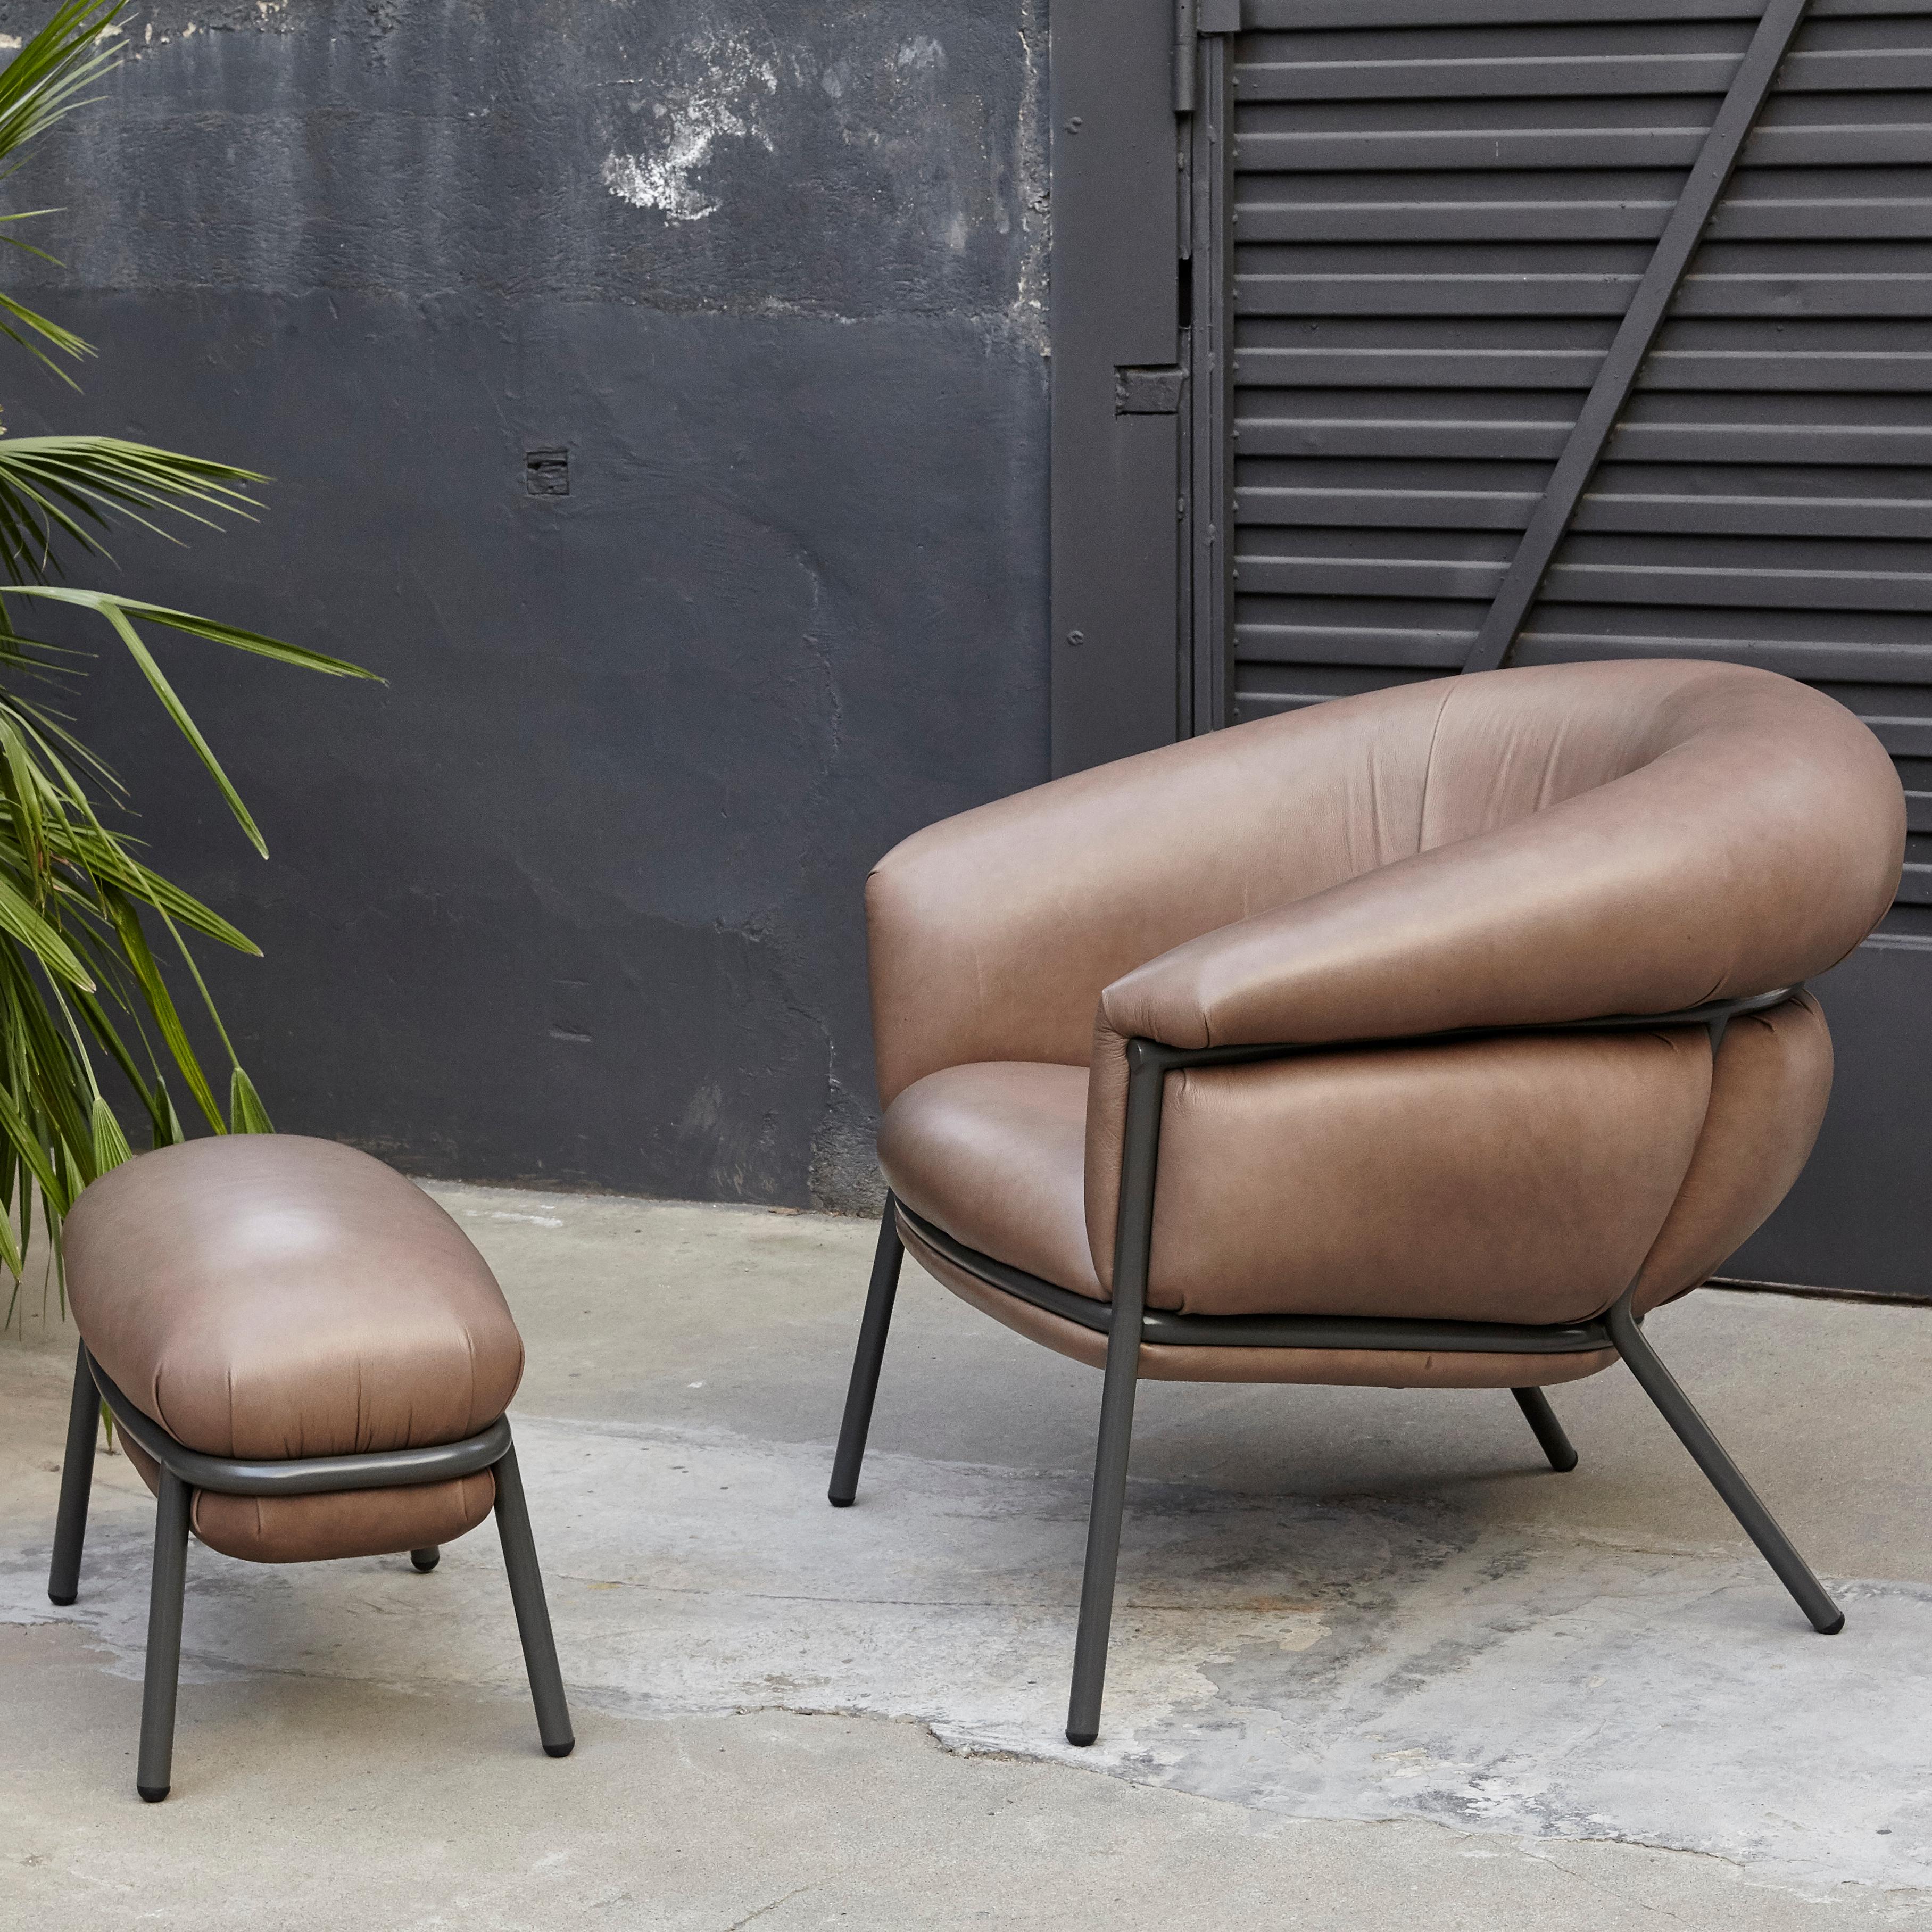 Armchair and foot stool designed by Stephen Bruks manufactured by BD Barcelona, circa 2018.

In good original condition with minor wear consistent with age and use.

An iron tubular (25mm) structured armchair. Seat and backrest upholstered in